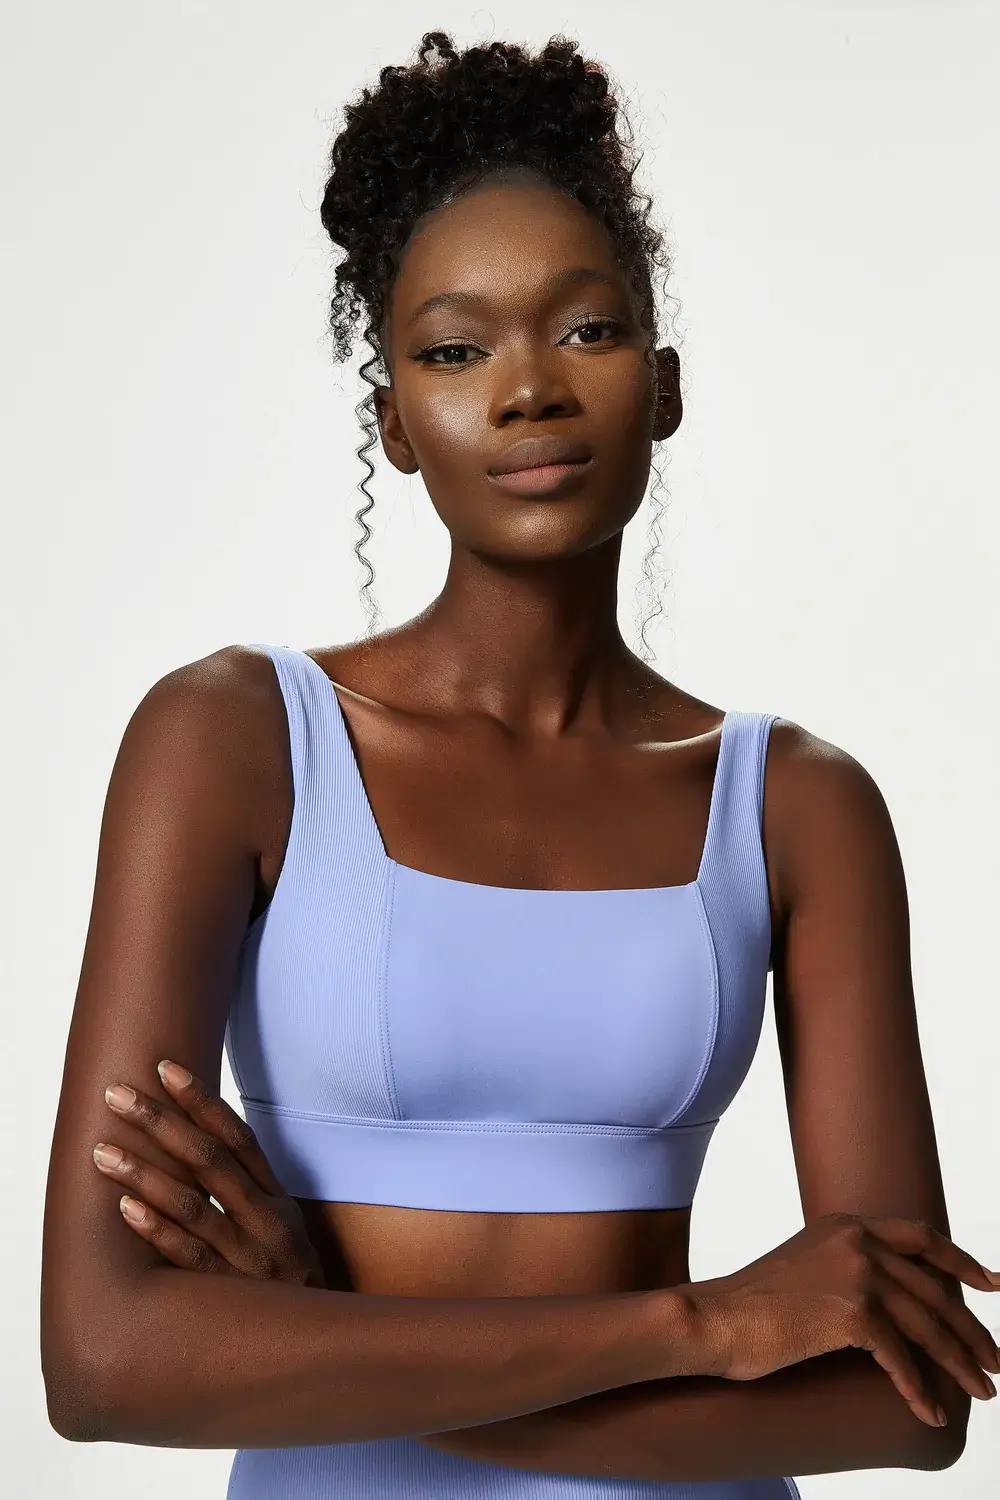 How To Select The Best Sports Bra For Girls? – Gymwearmovement